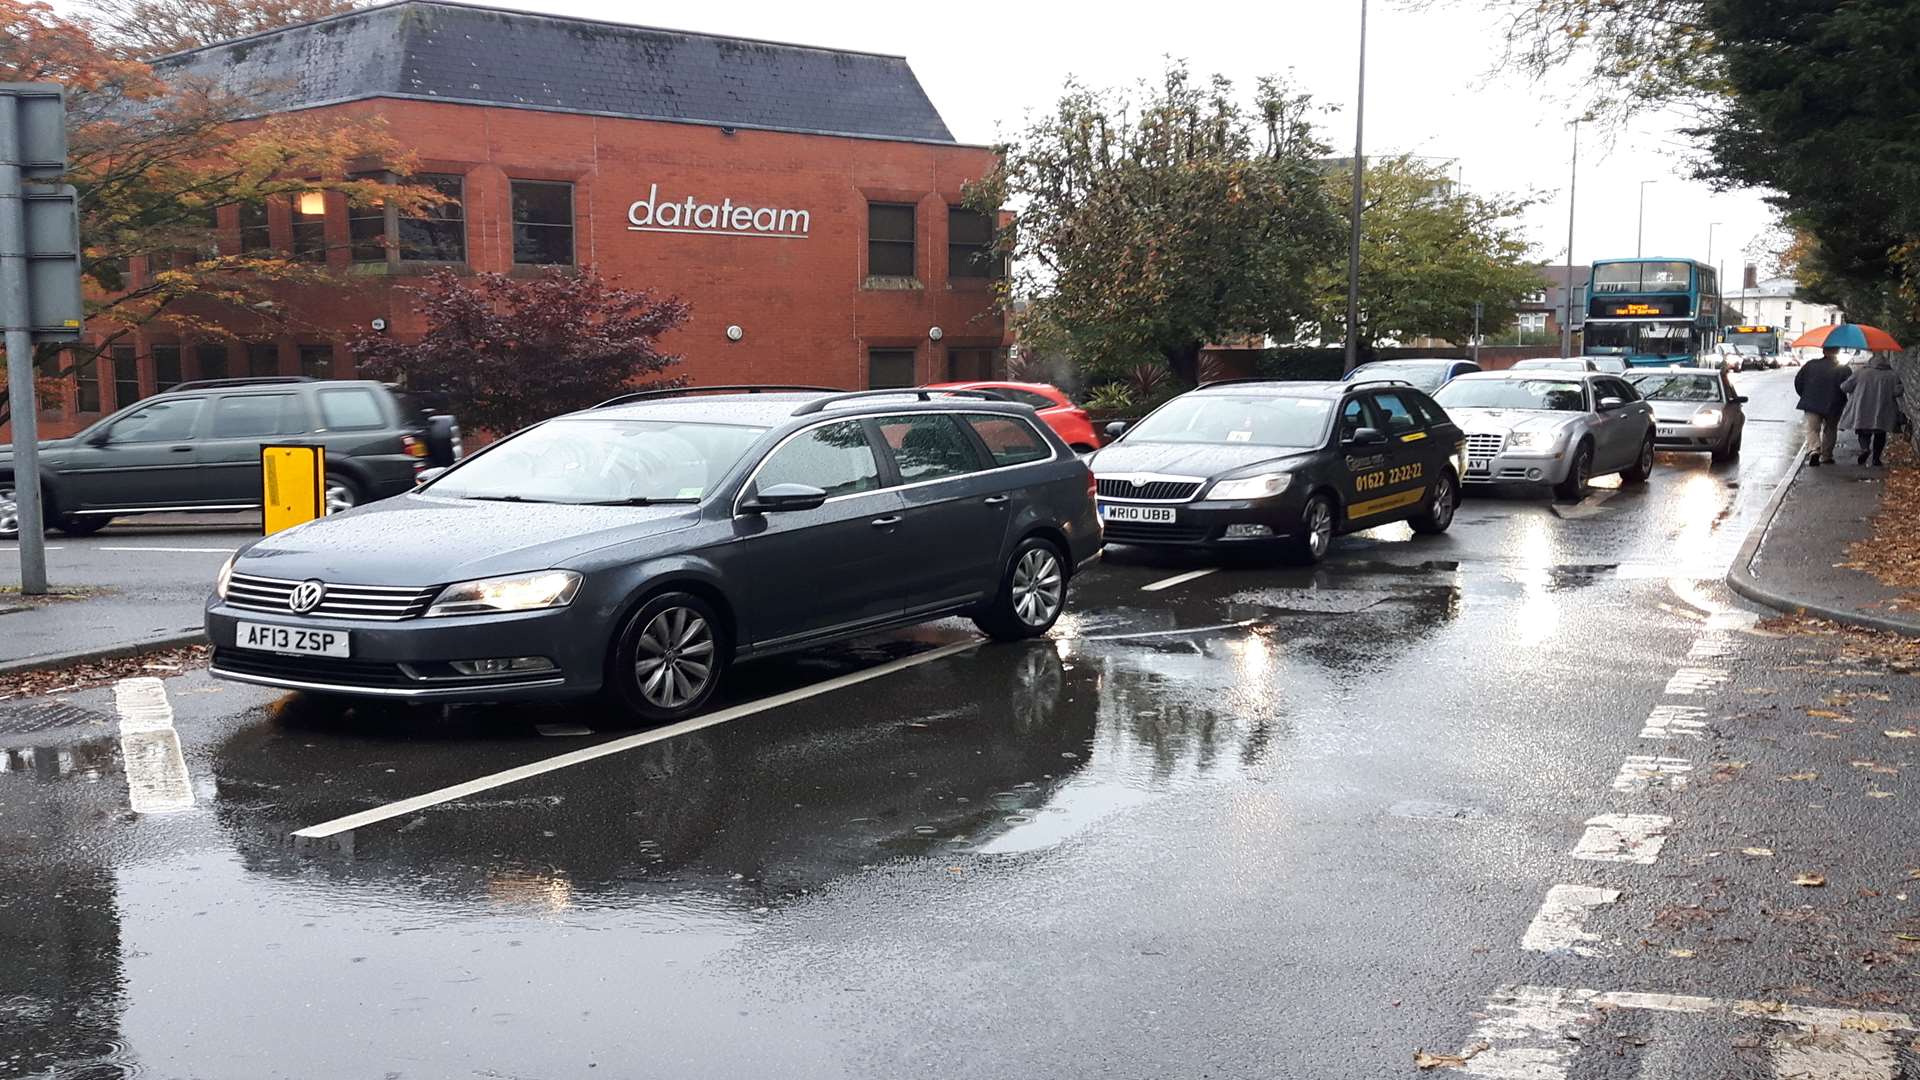 Flooding in the town centre is adding to congestion